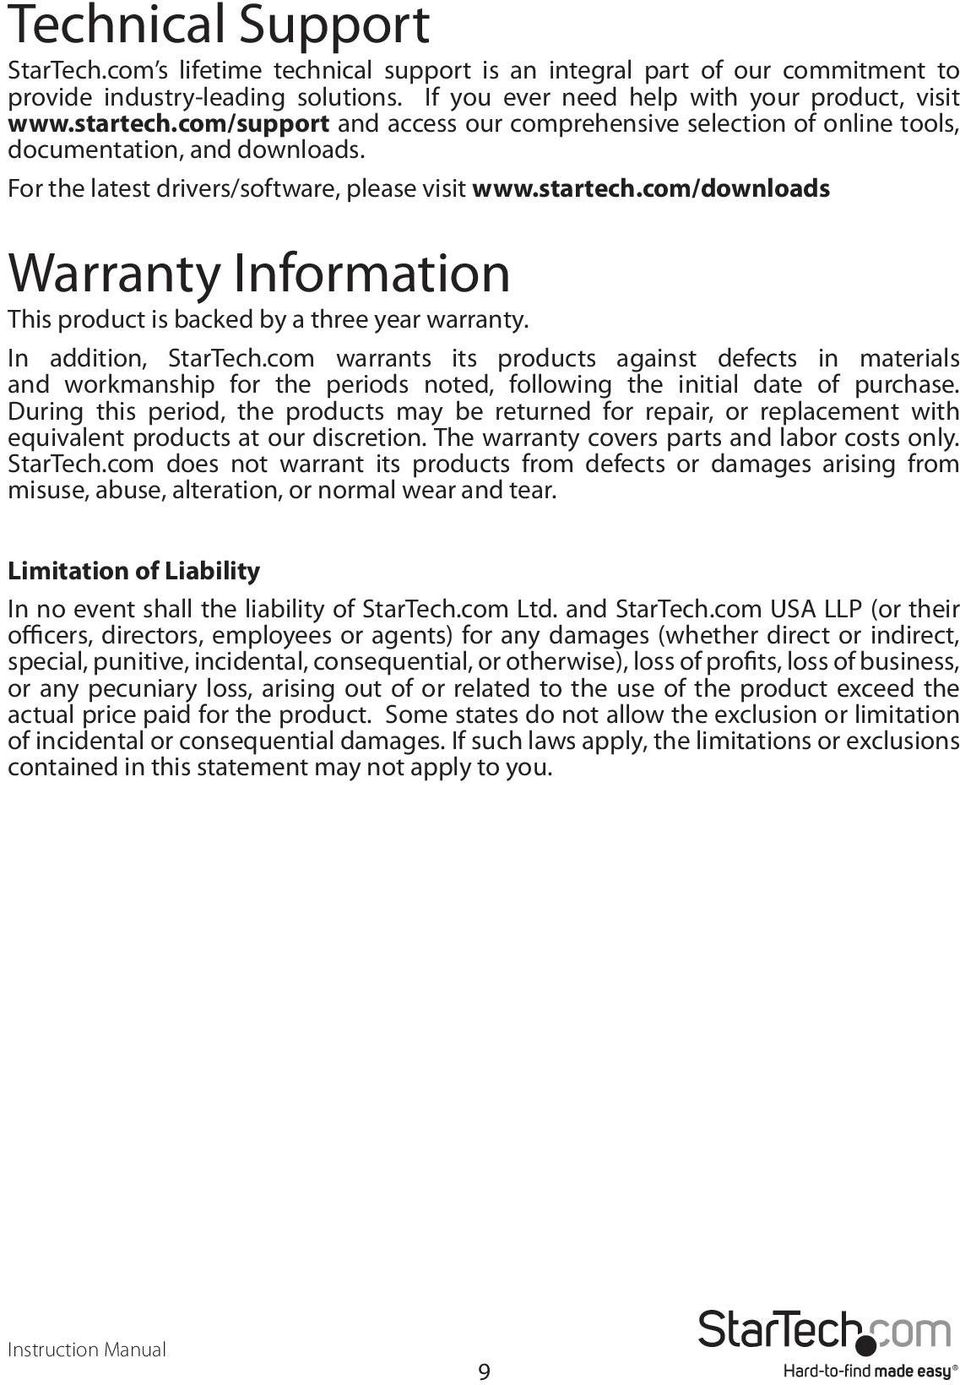 com/downloads Warranty Information This product is backed by a three year warranty. In addition, StarTech.